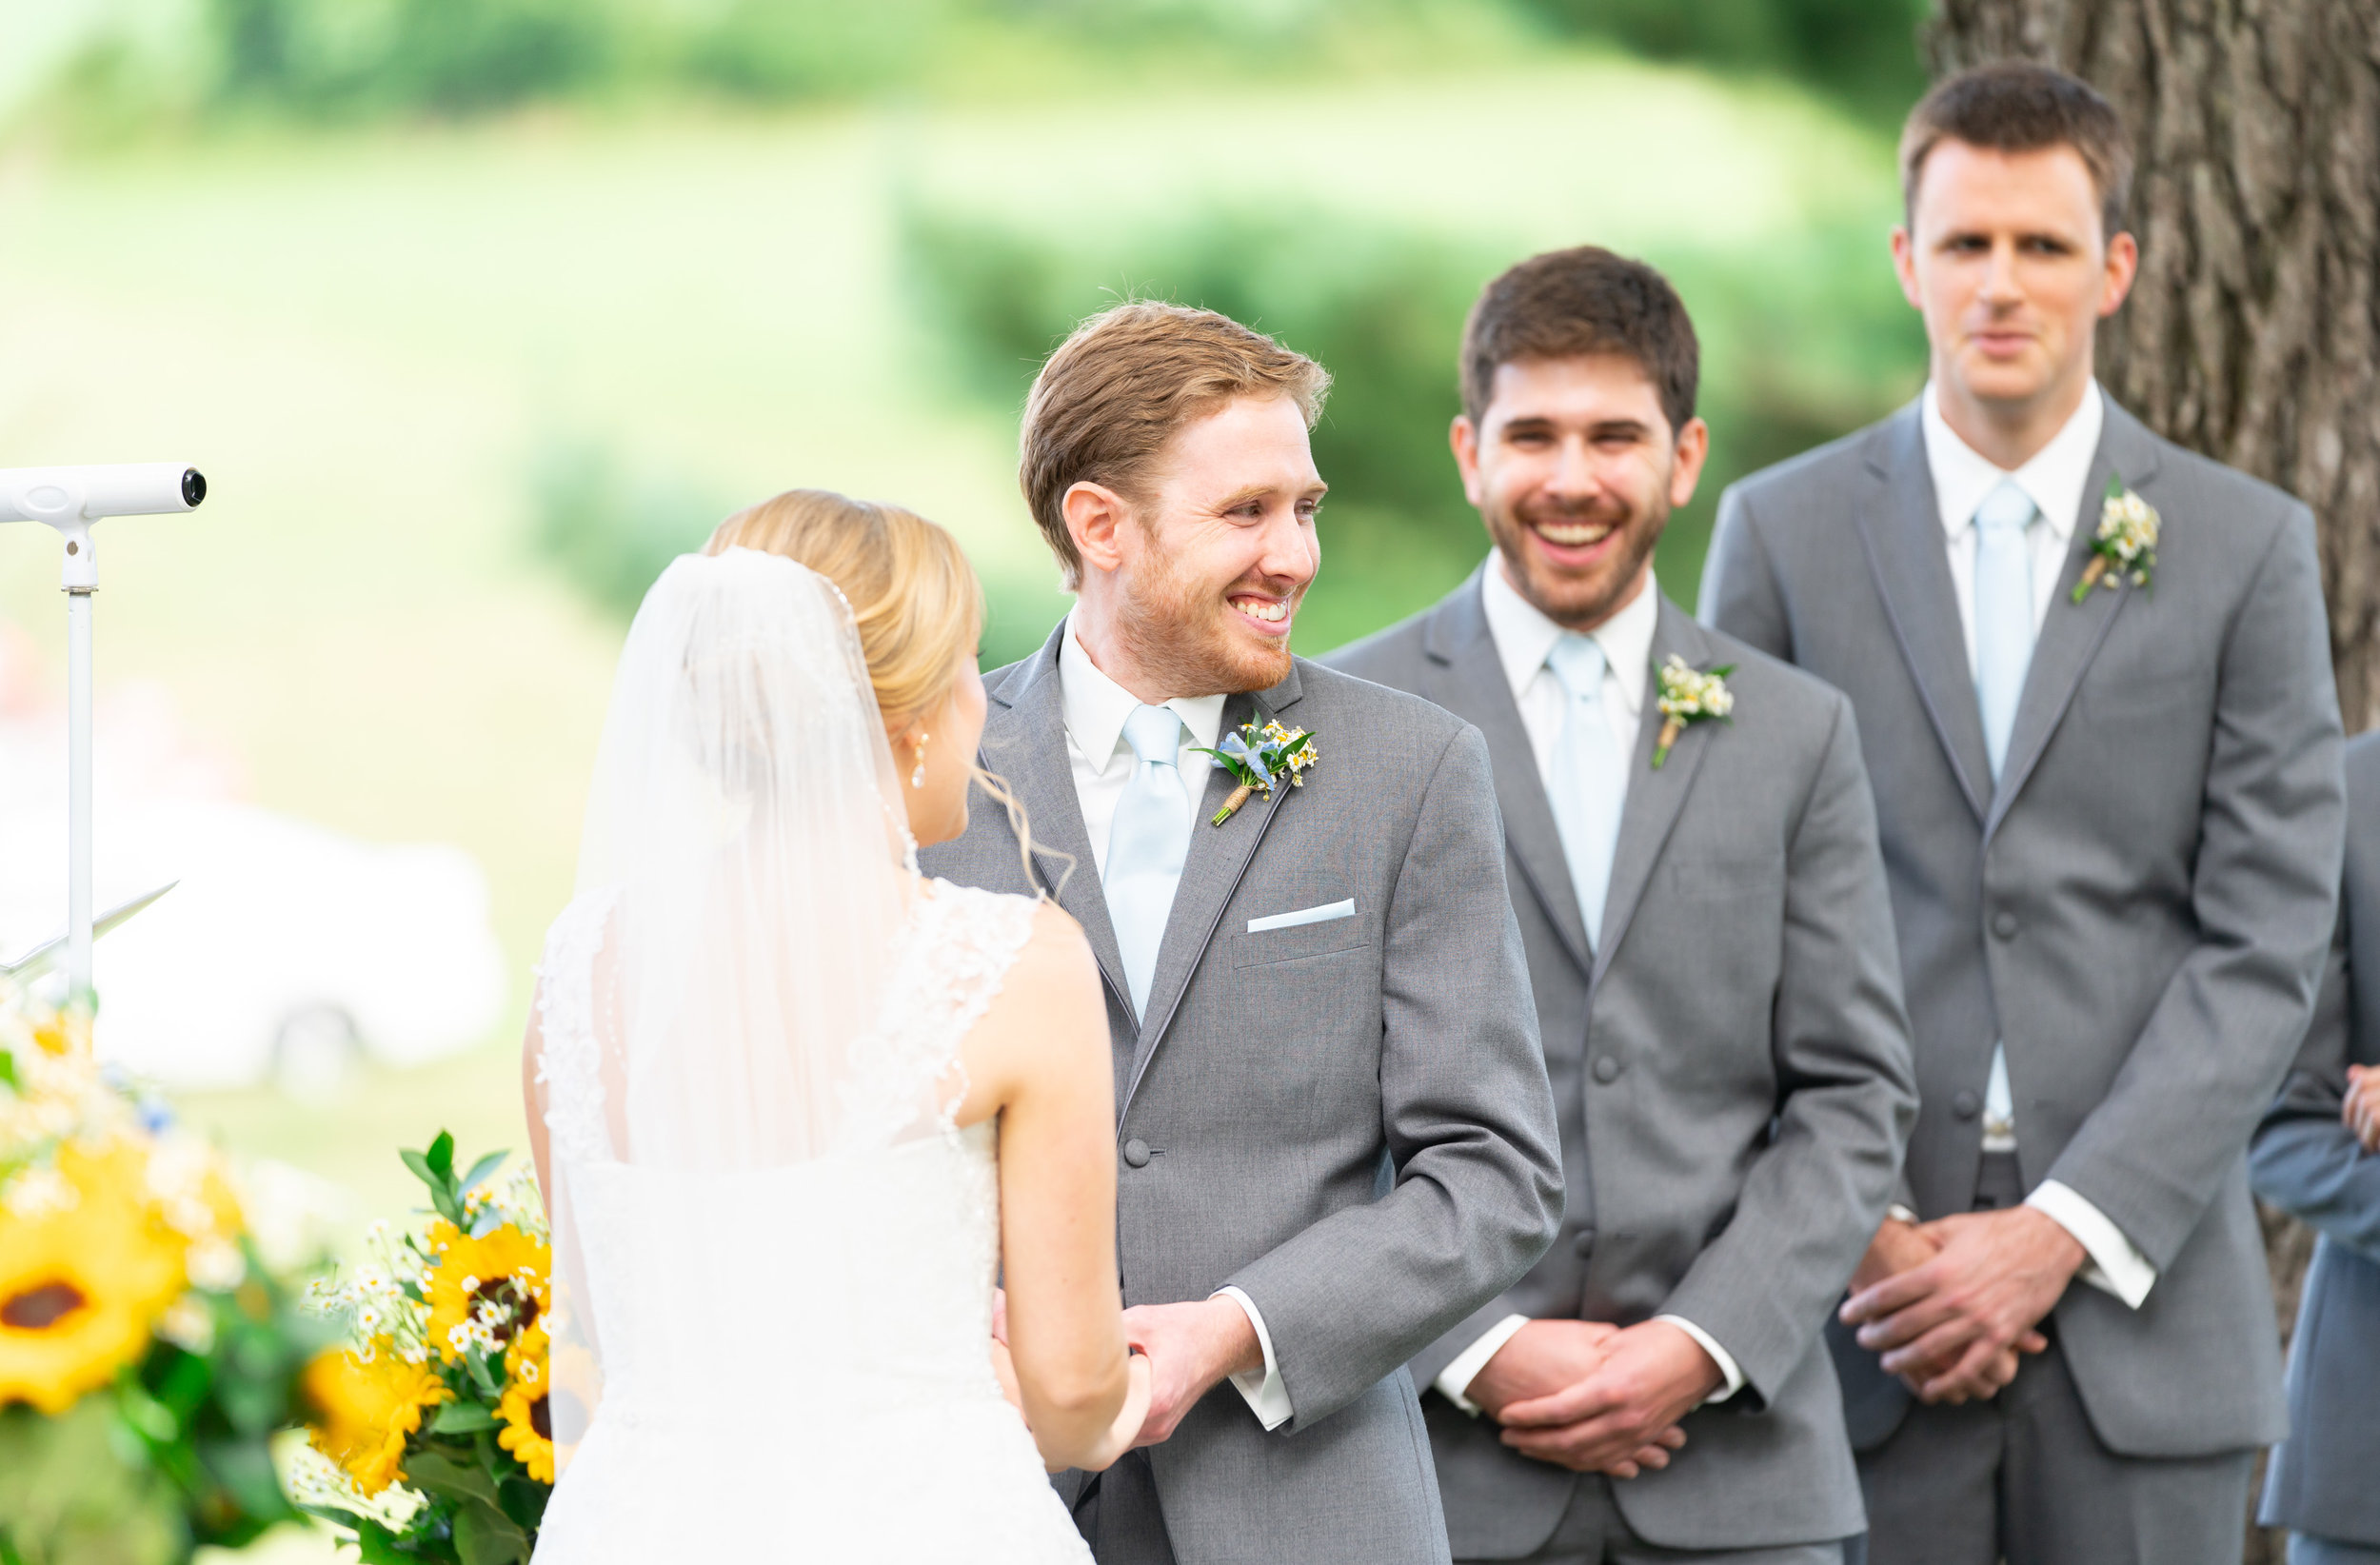 Outdoor wedding ceremony at Stone Manor Country Club